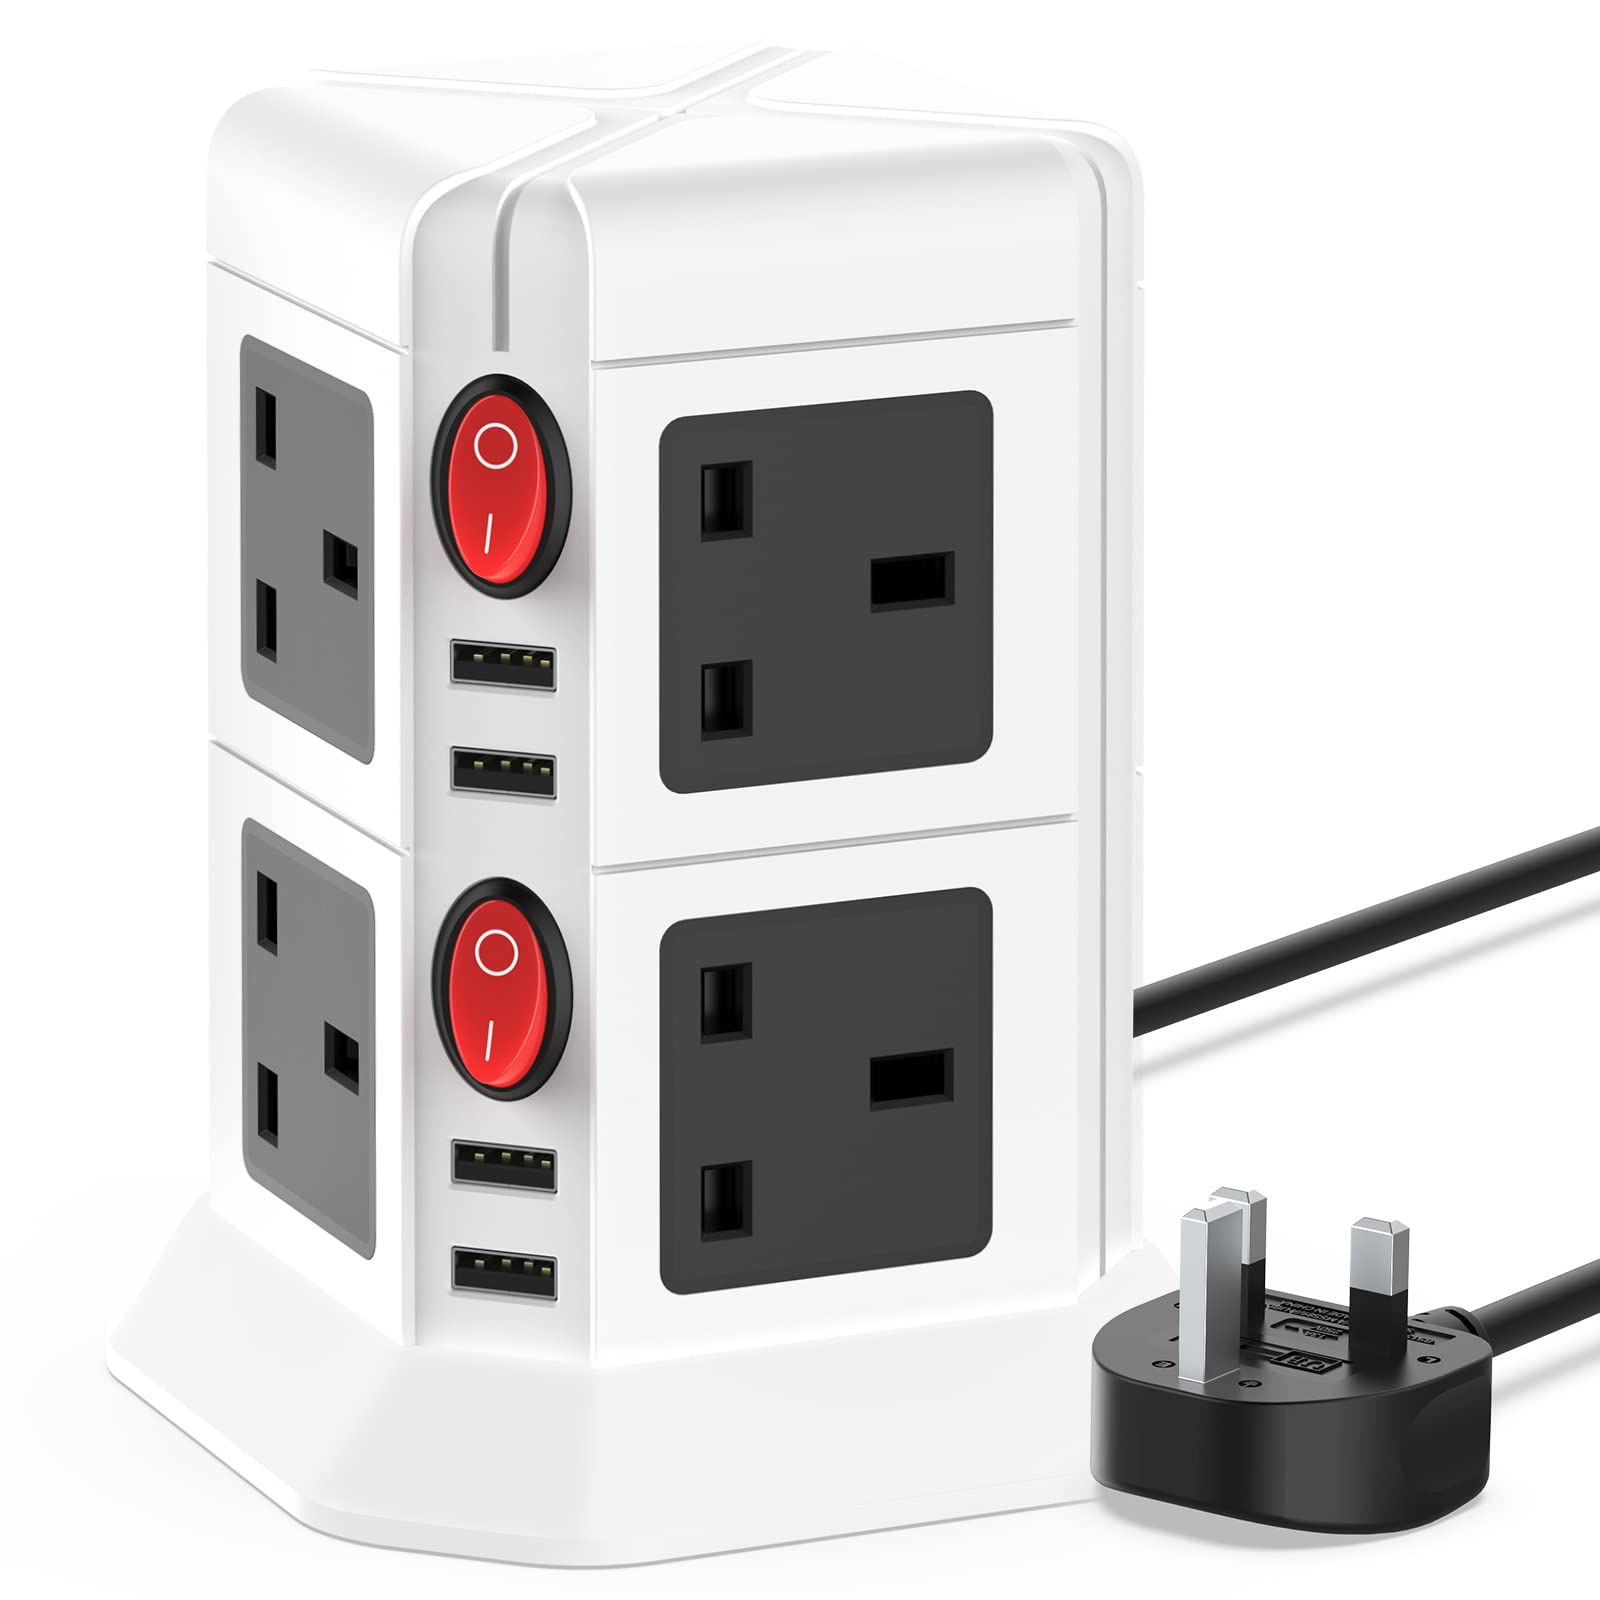 Tower Extension Lead with USB Slots 2m with 8 Outlets(2500W) & 4 USB Ports Eextension Lead with USB Slots, Surge Protection 10A/2500W for Home, Office